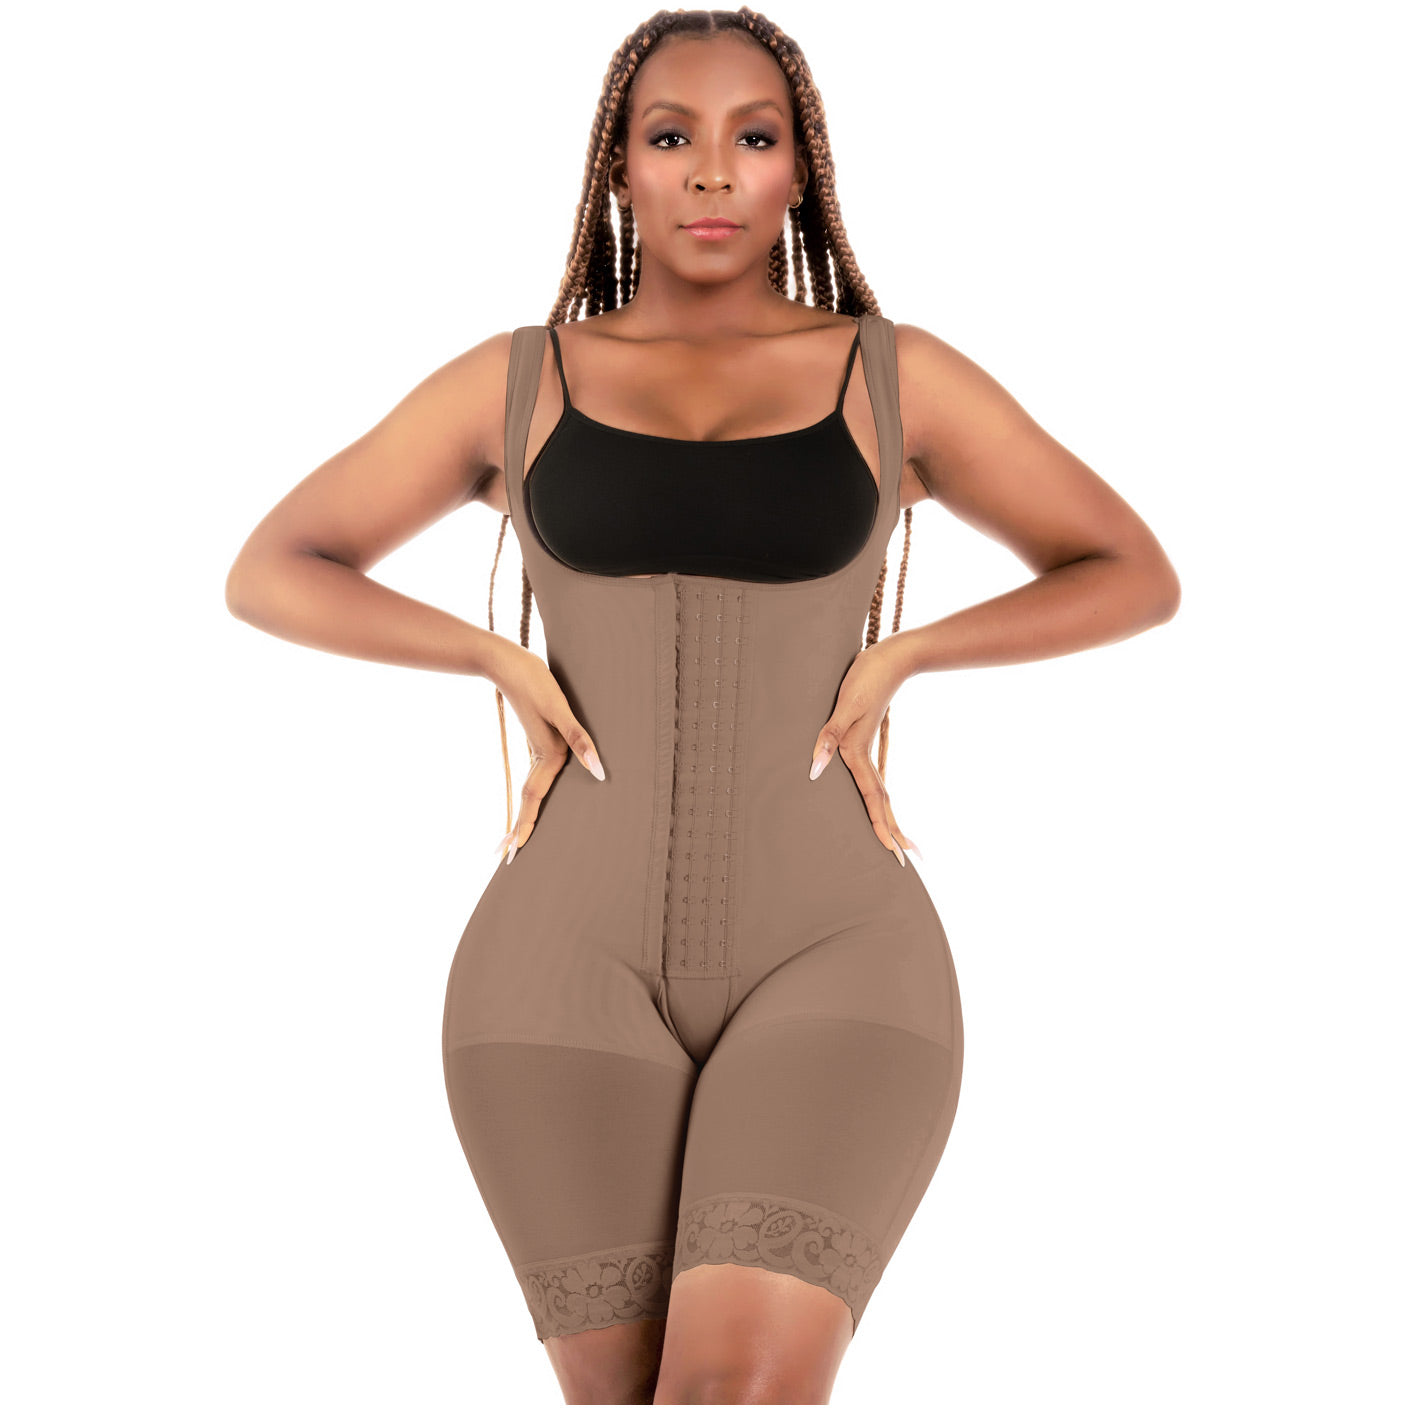 Bling Shapers 098 | Colombian Butt Lift | Tummy Control Shapewear for Curvy Women with Wide Hips and Small Waist | Powernet Magic